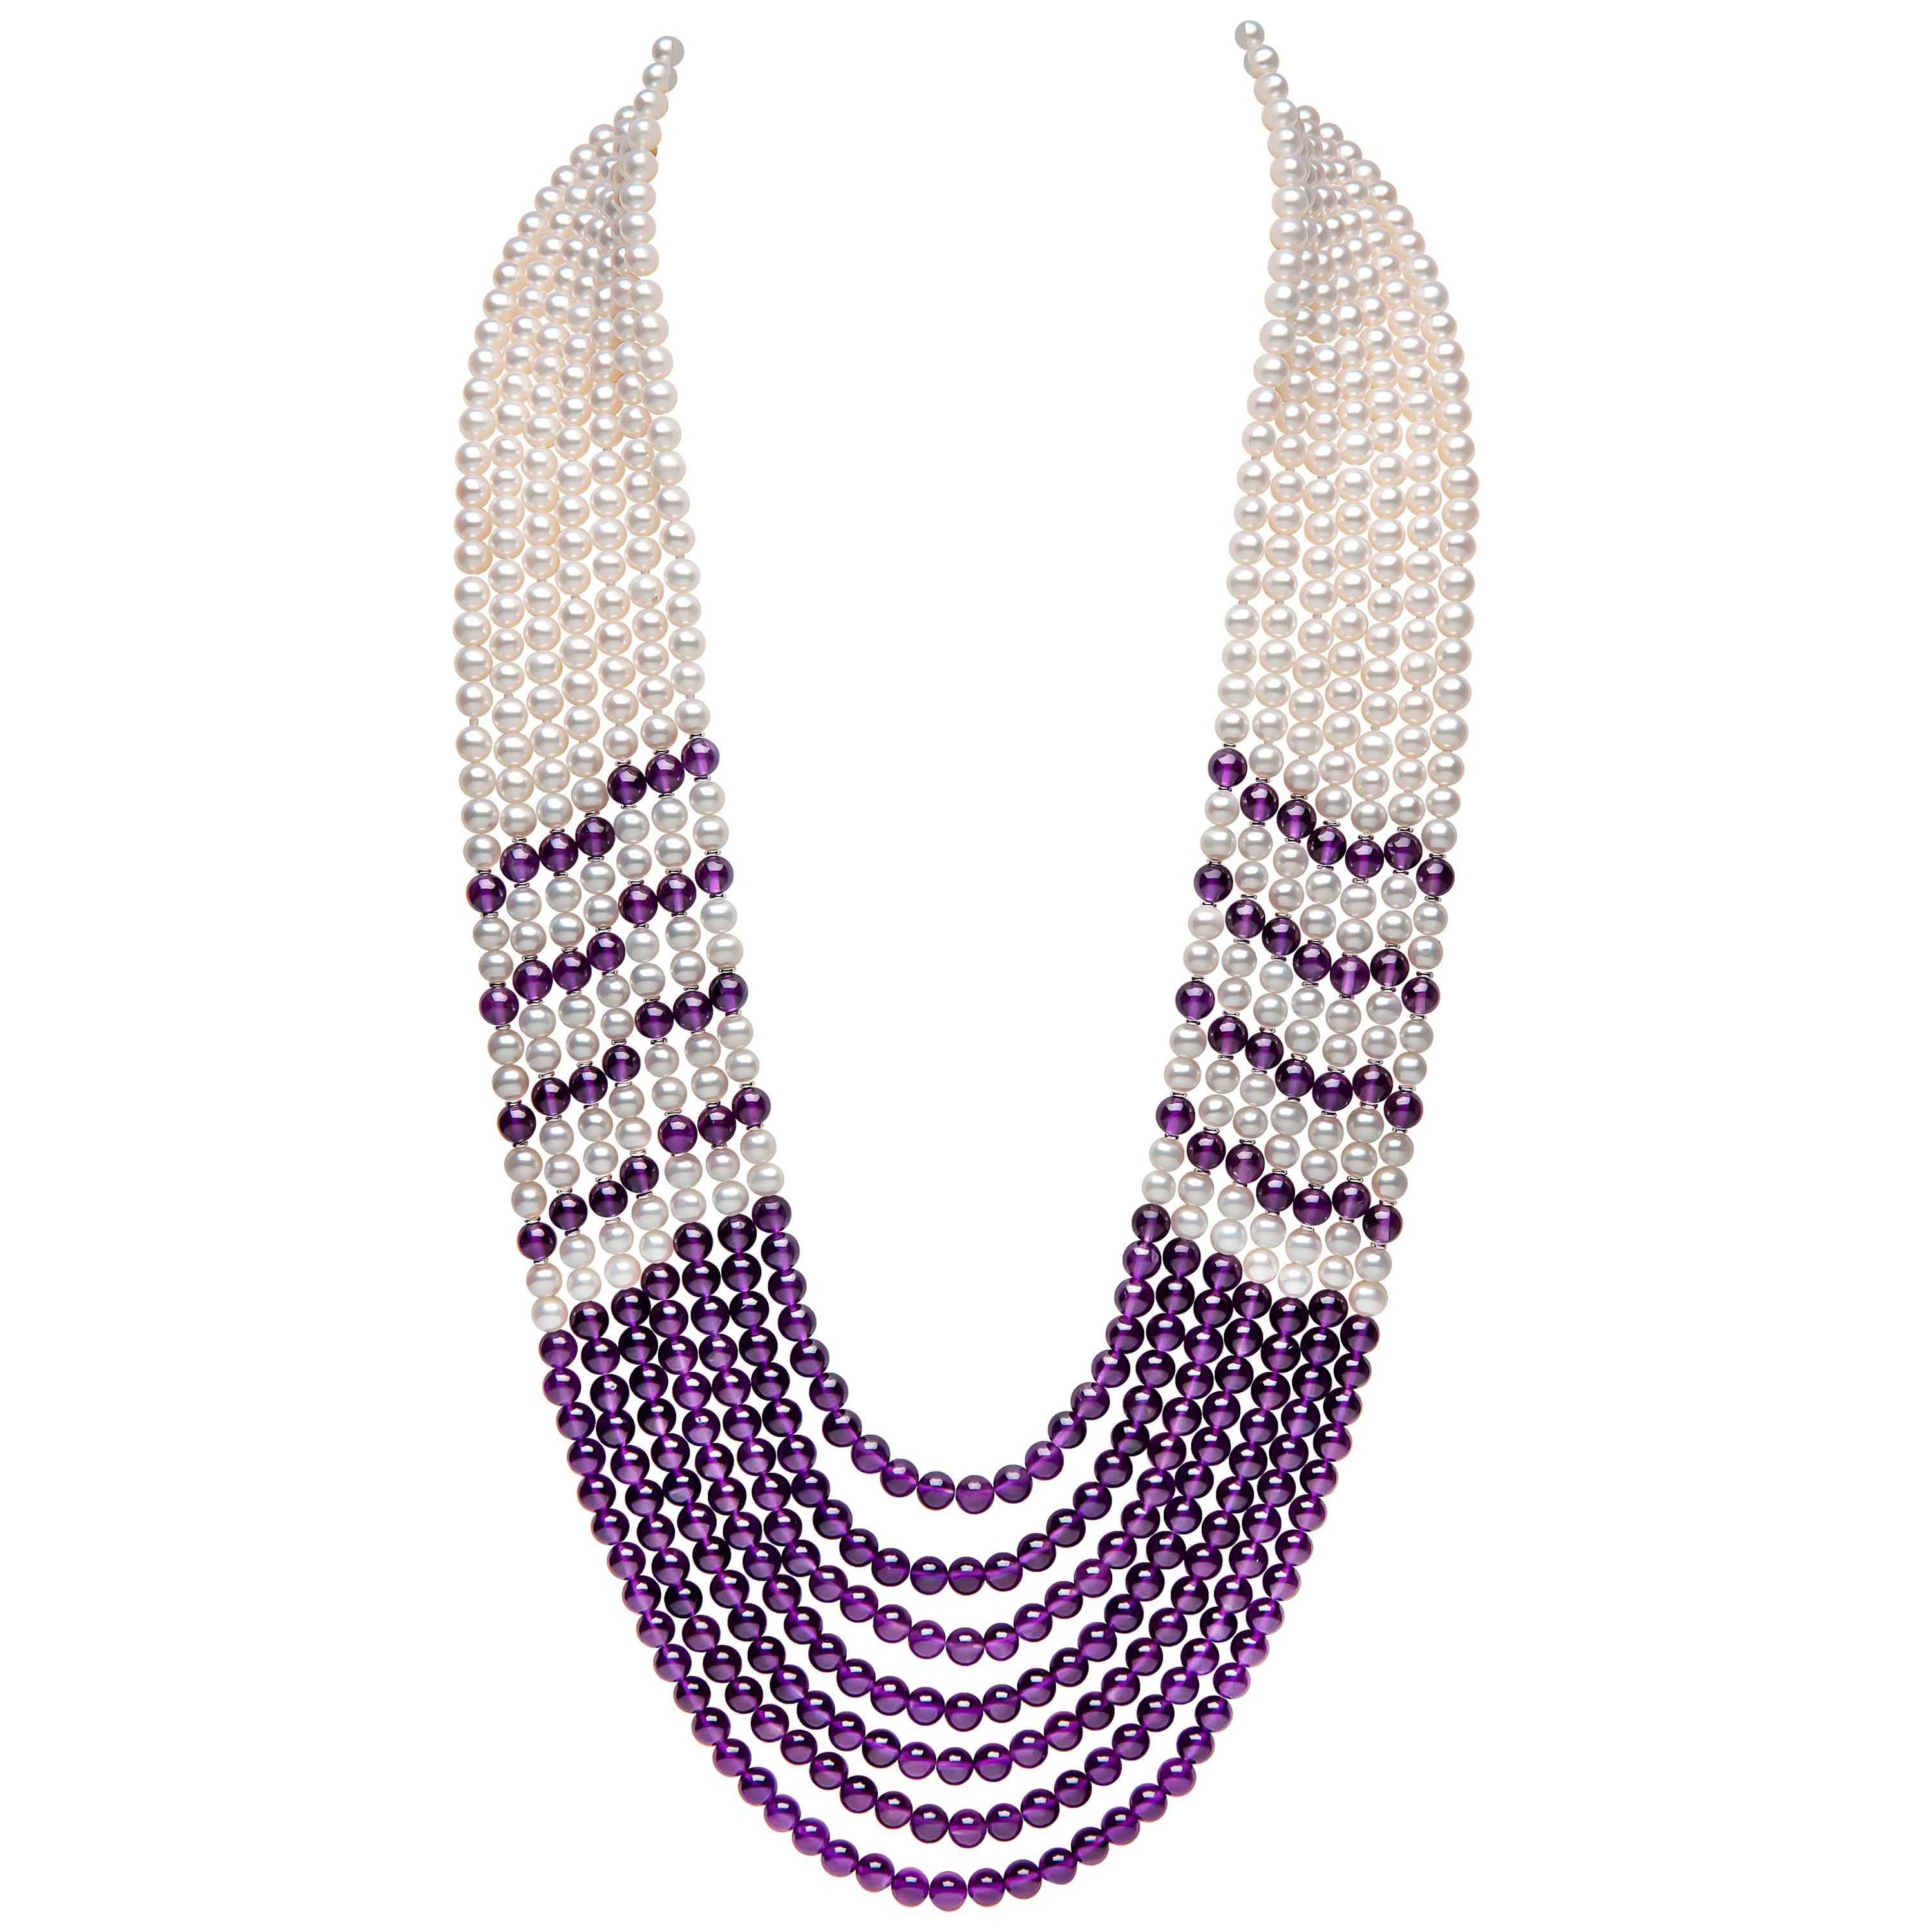 Yoko London Freshwater Pearl and Amethyst Necklace in 18 Karat White Gold